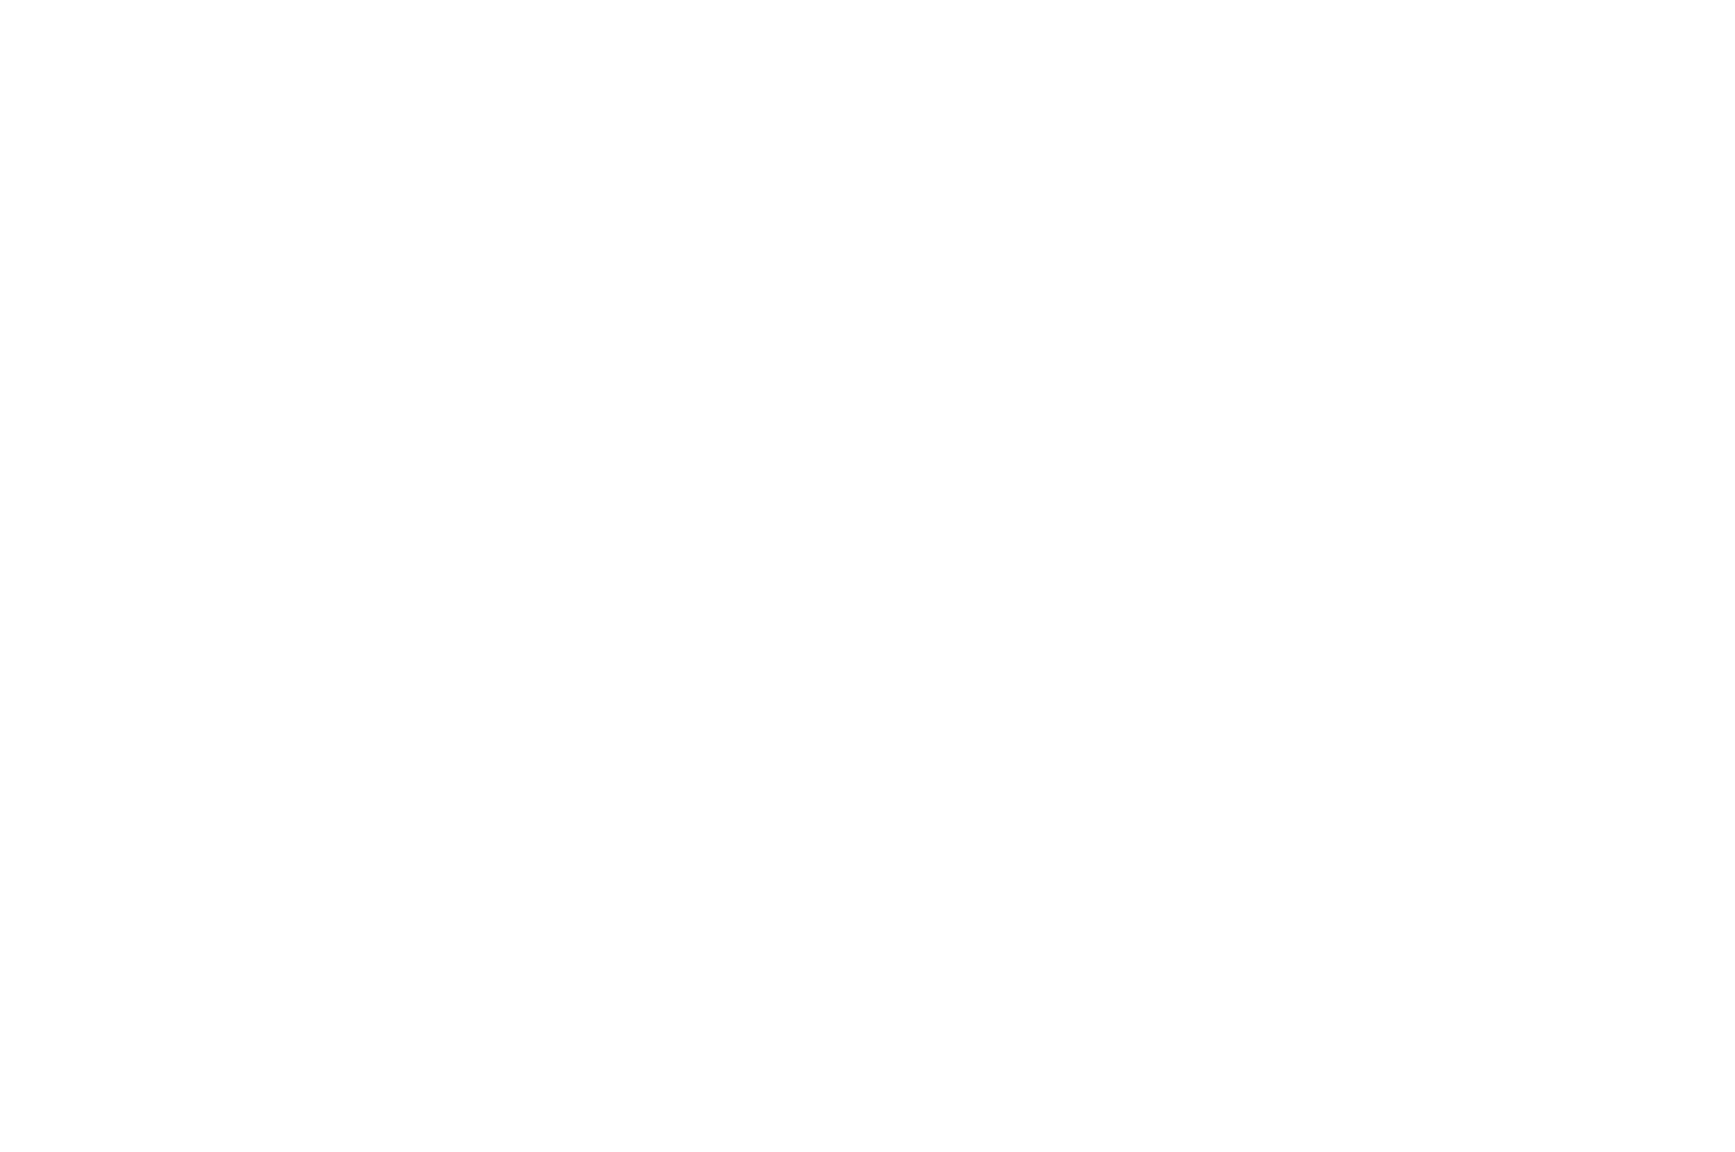 OFFICIAL SELECTION - Chicago Indie Film Awards - 2022